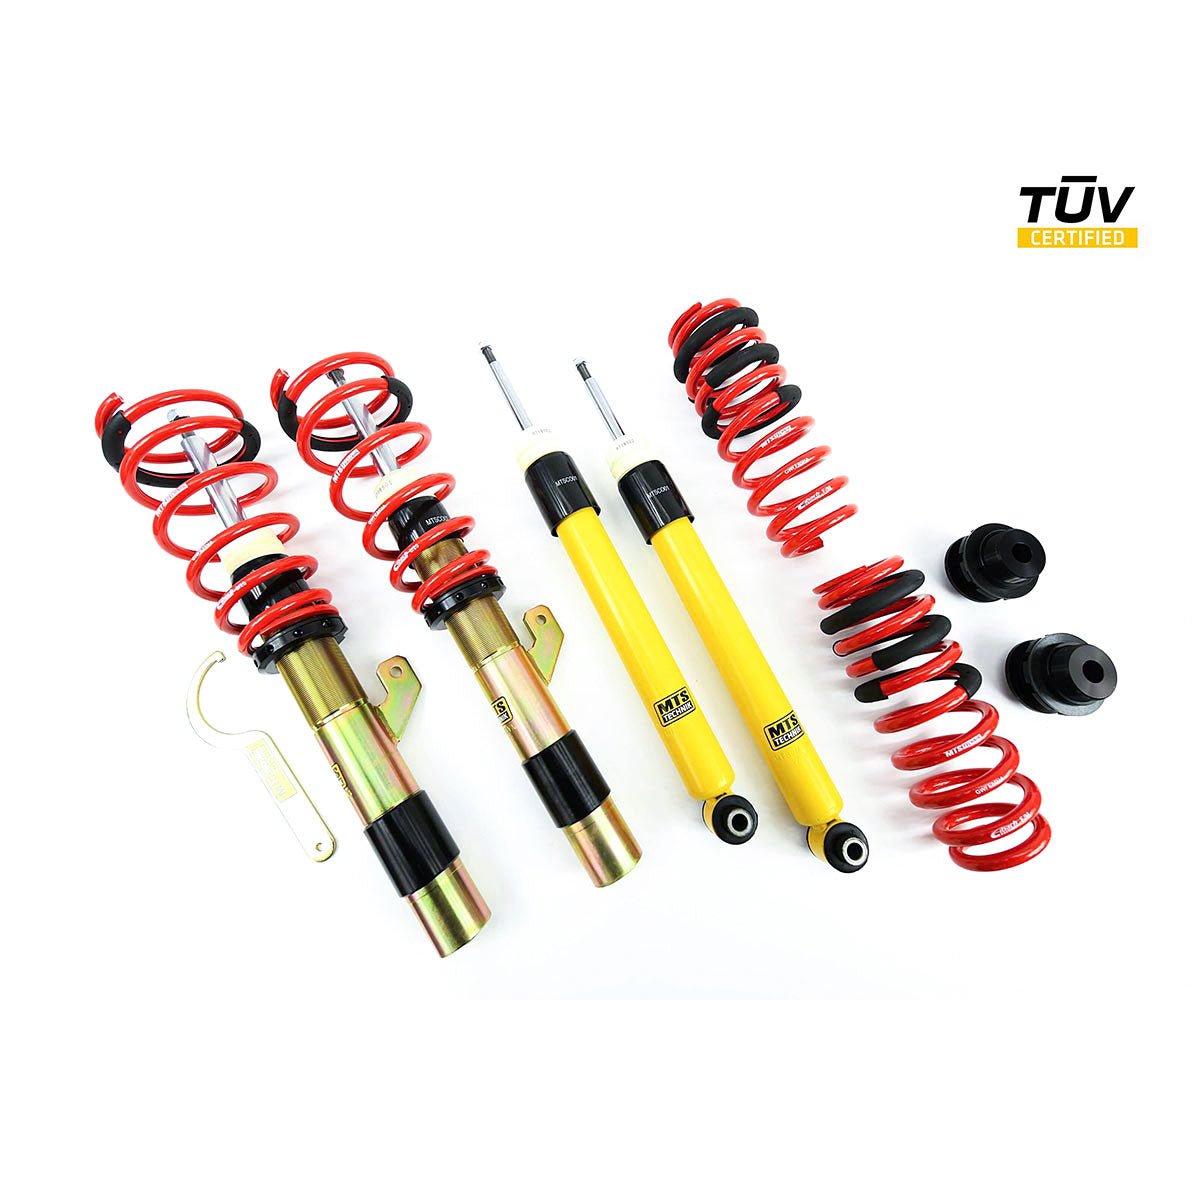 MTS TECHNIK coilover kit STREET BMW F32 (with TÜV) - PARTS33 GmbH